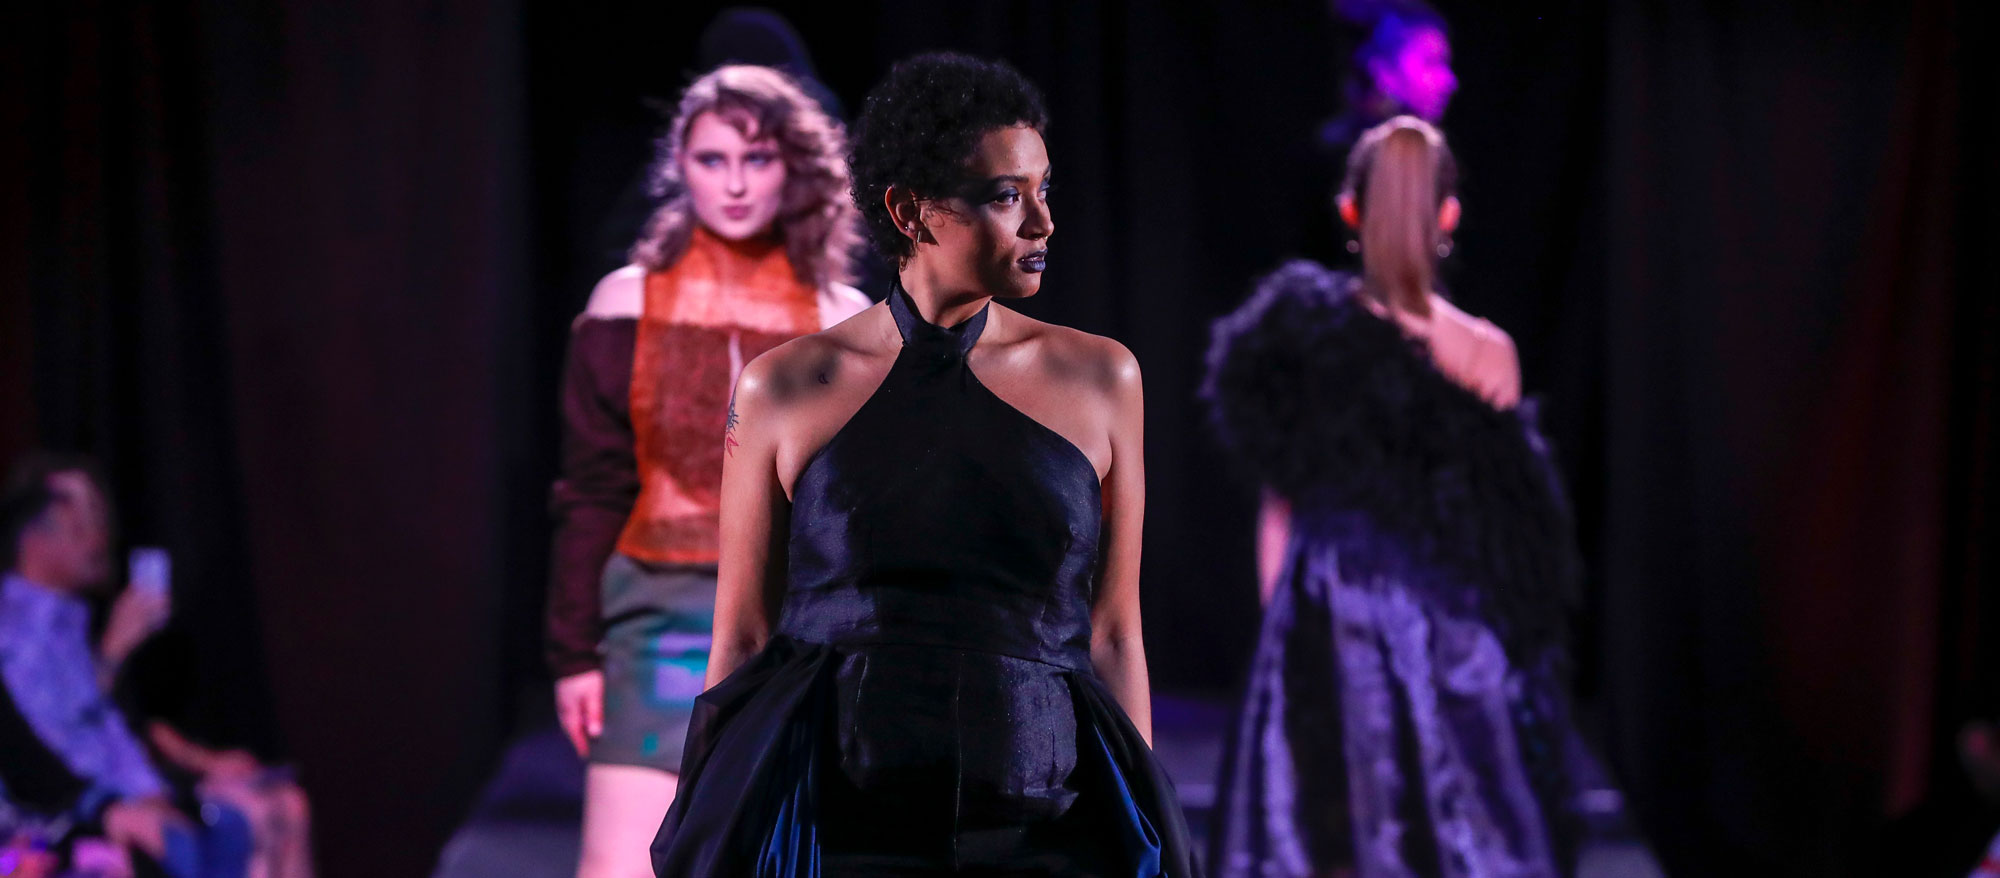 Students wearing fashions designed by apparel students walking the runway at the Apparel Design senior fashion show